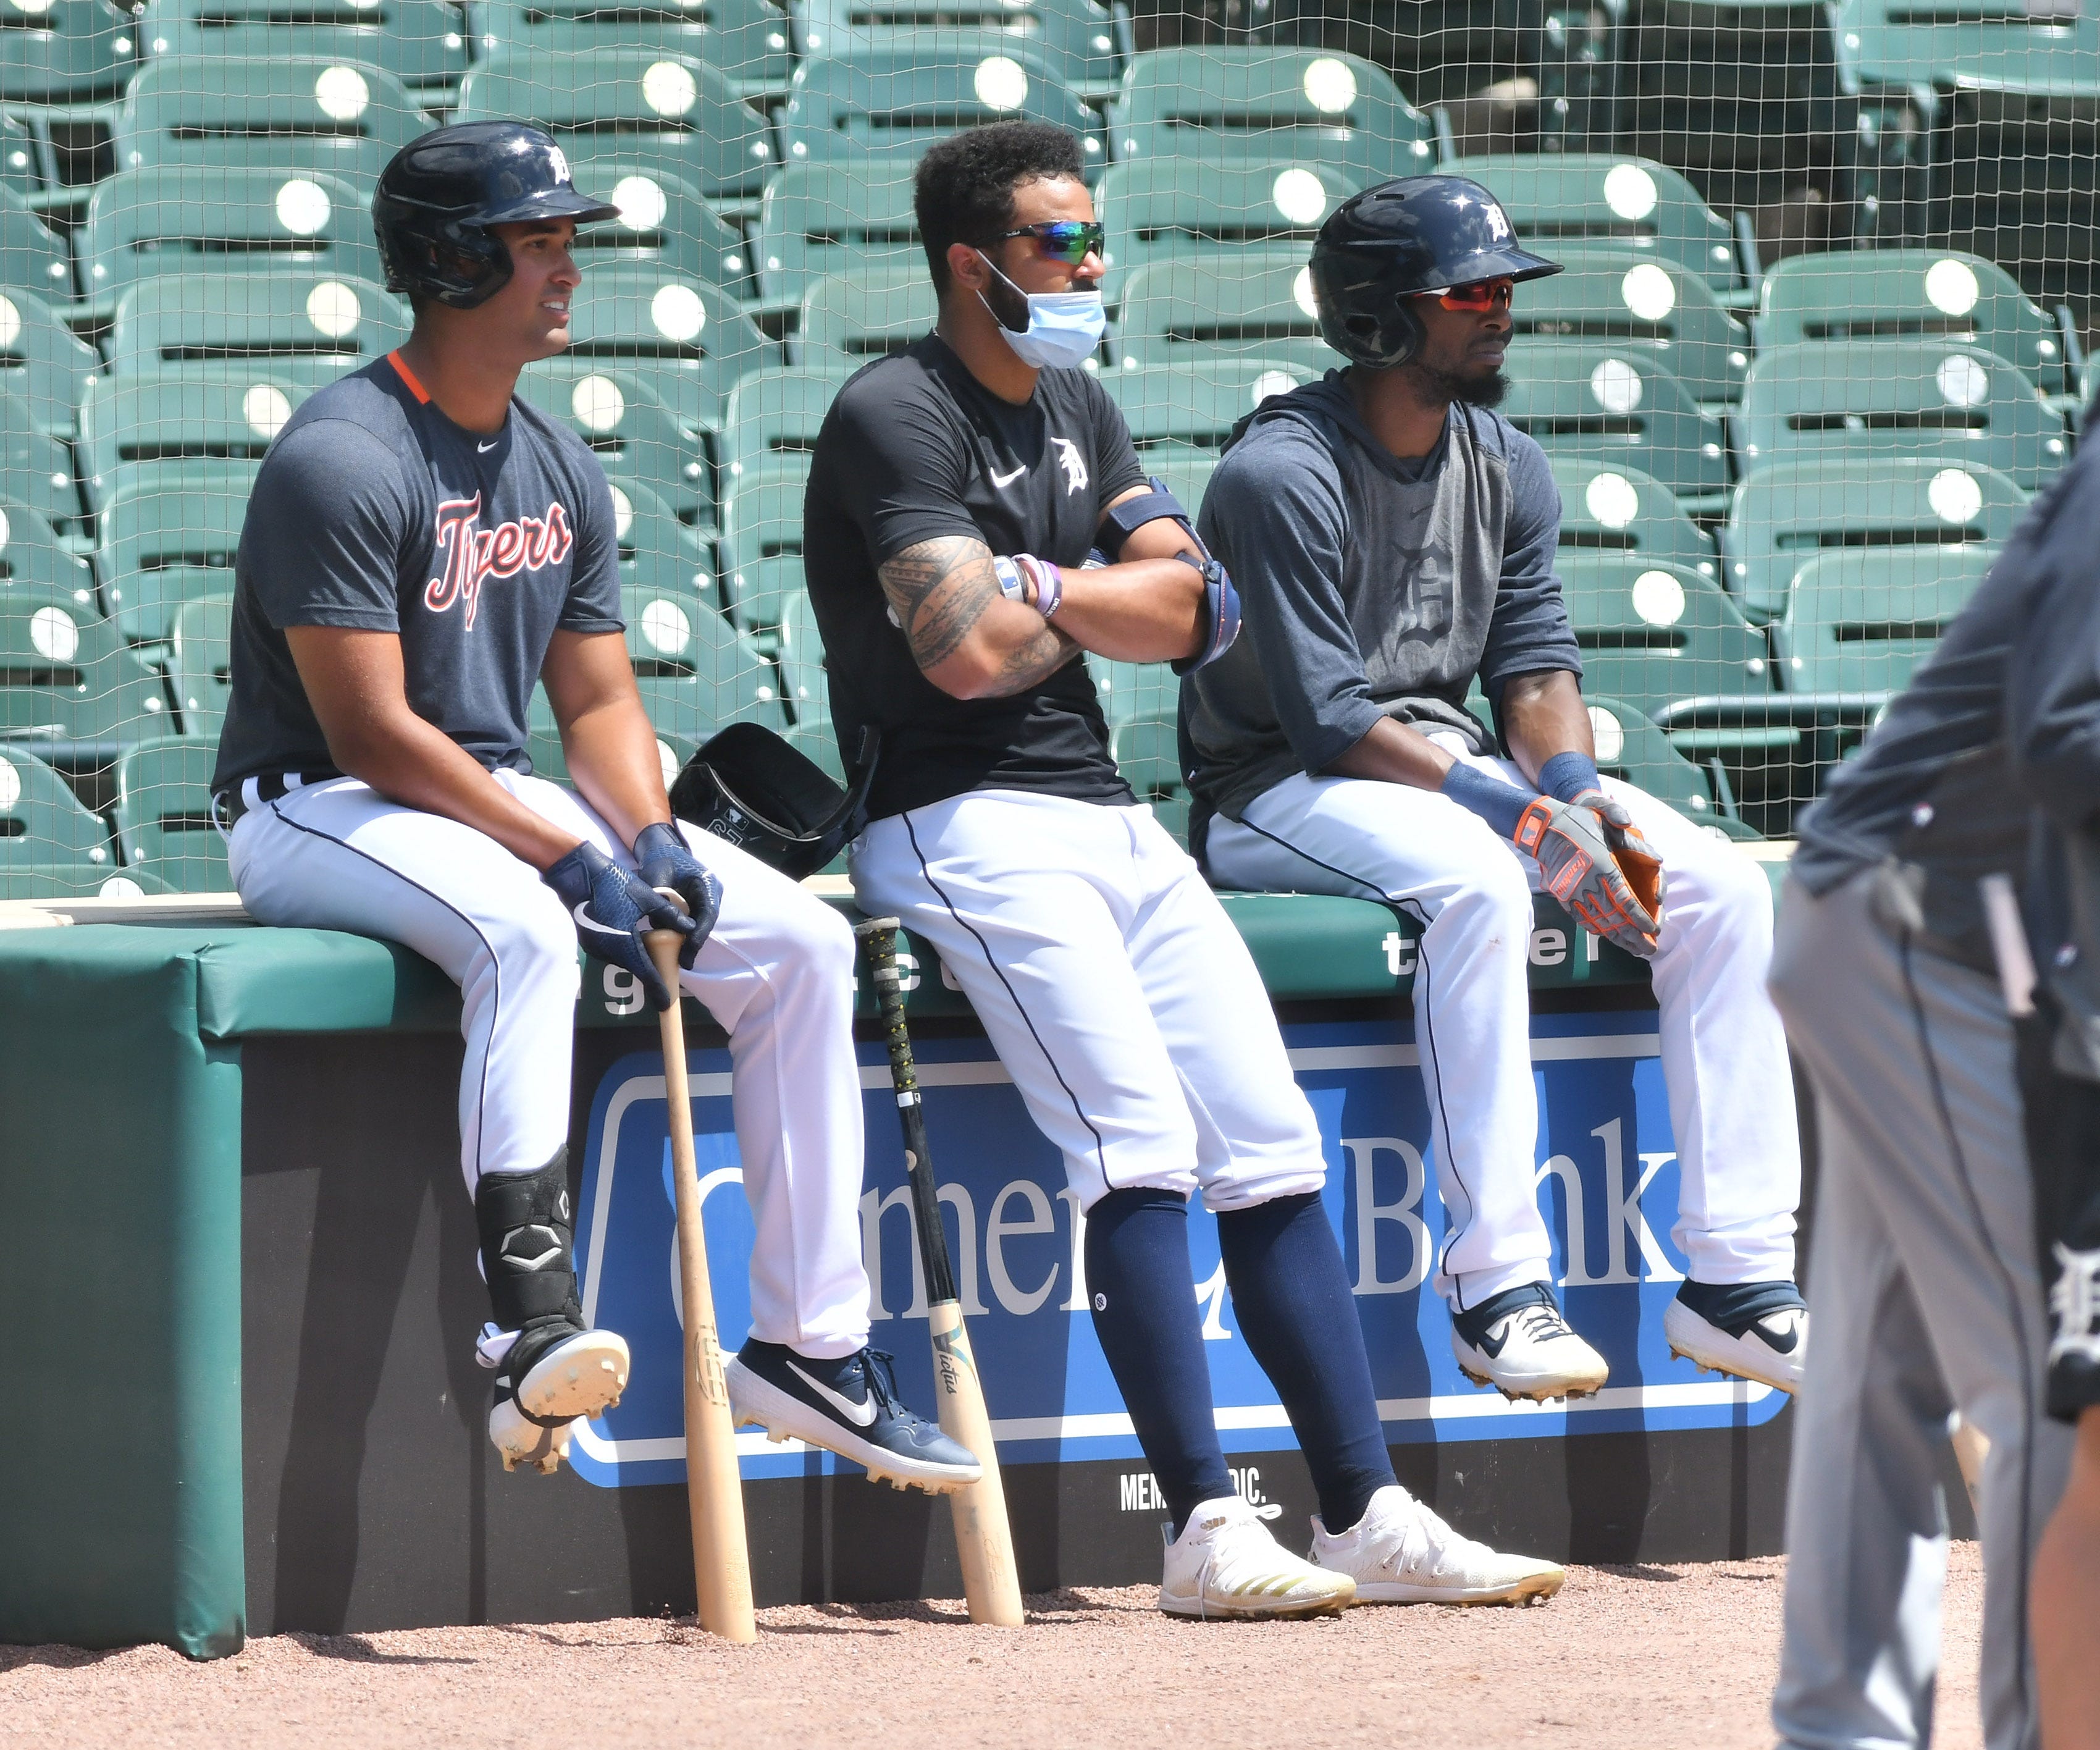 From left, non-roster invitee Riley Greene sits next to Tigers outfielders Derek Hill and Travis Demeritte during batting practice.